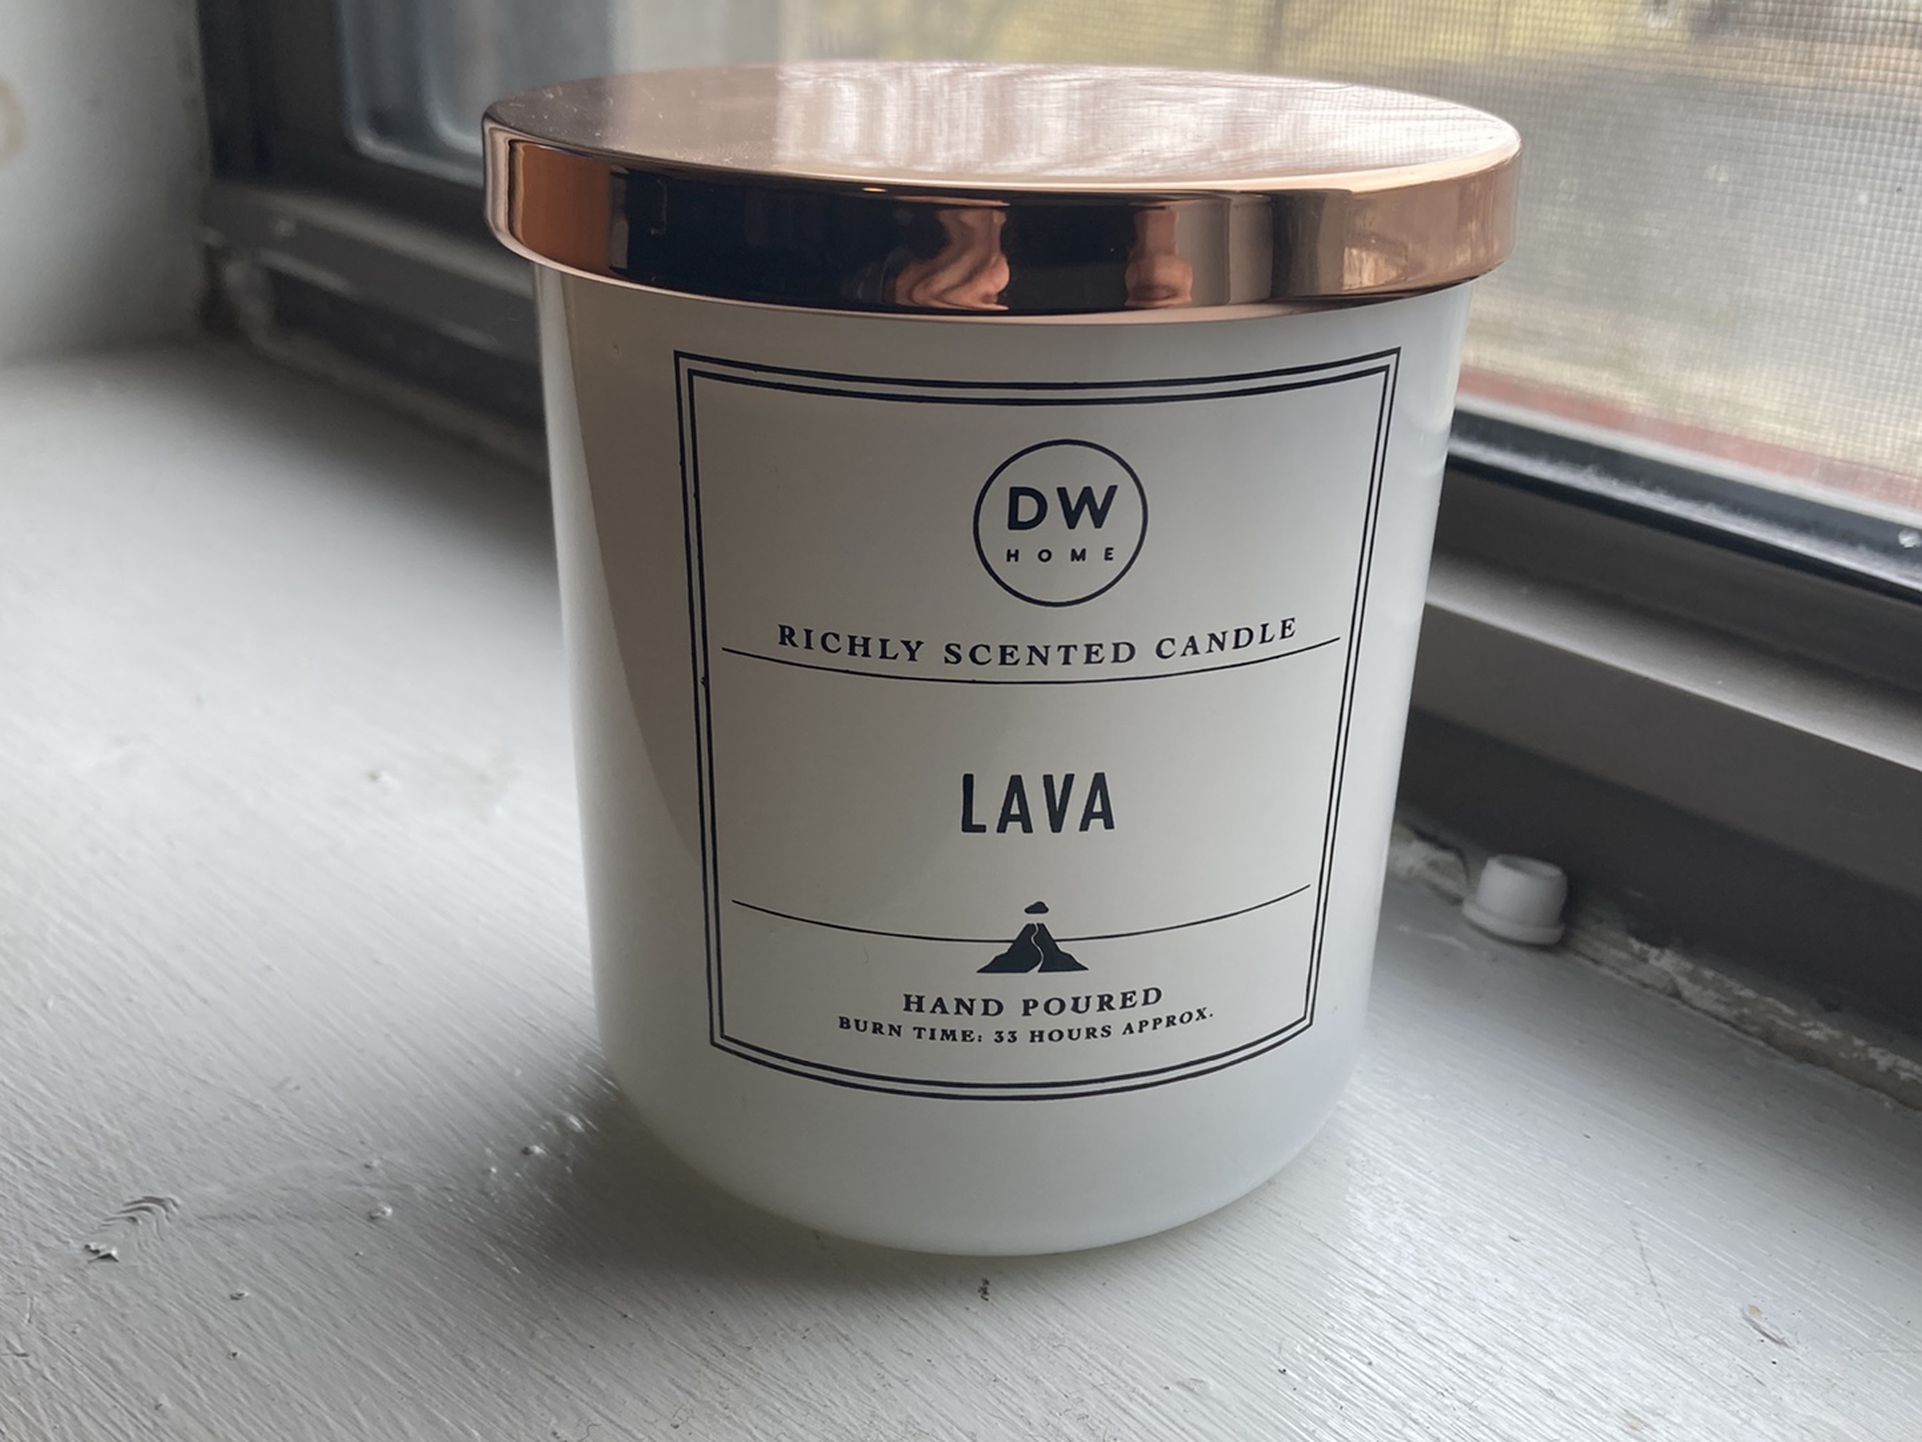 Brand New DW Home Lava candle